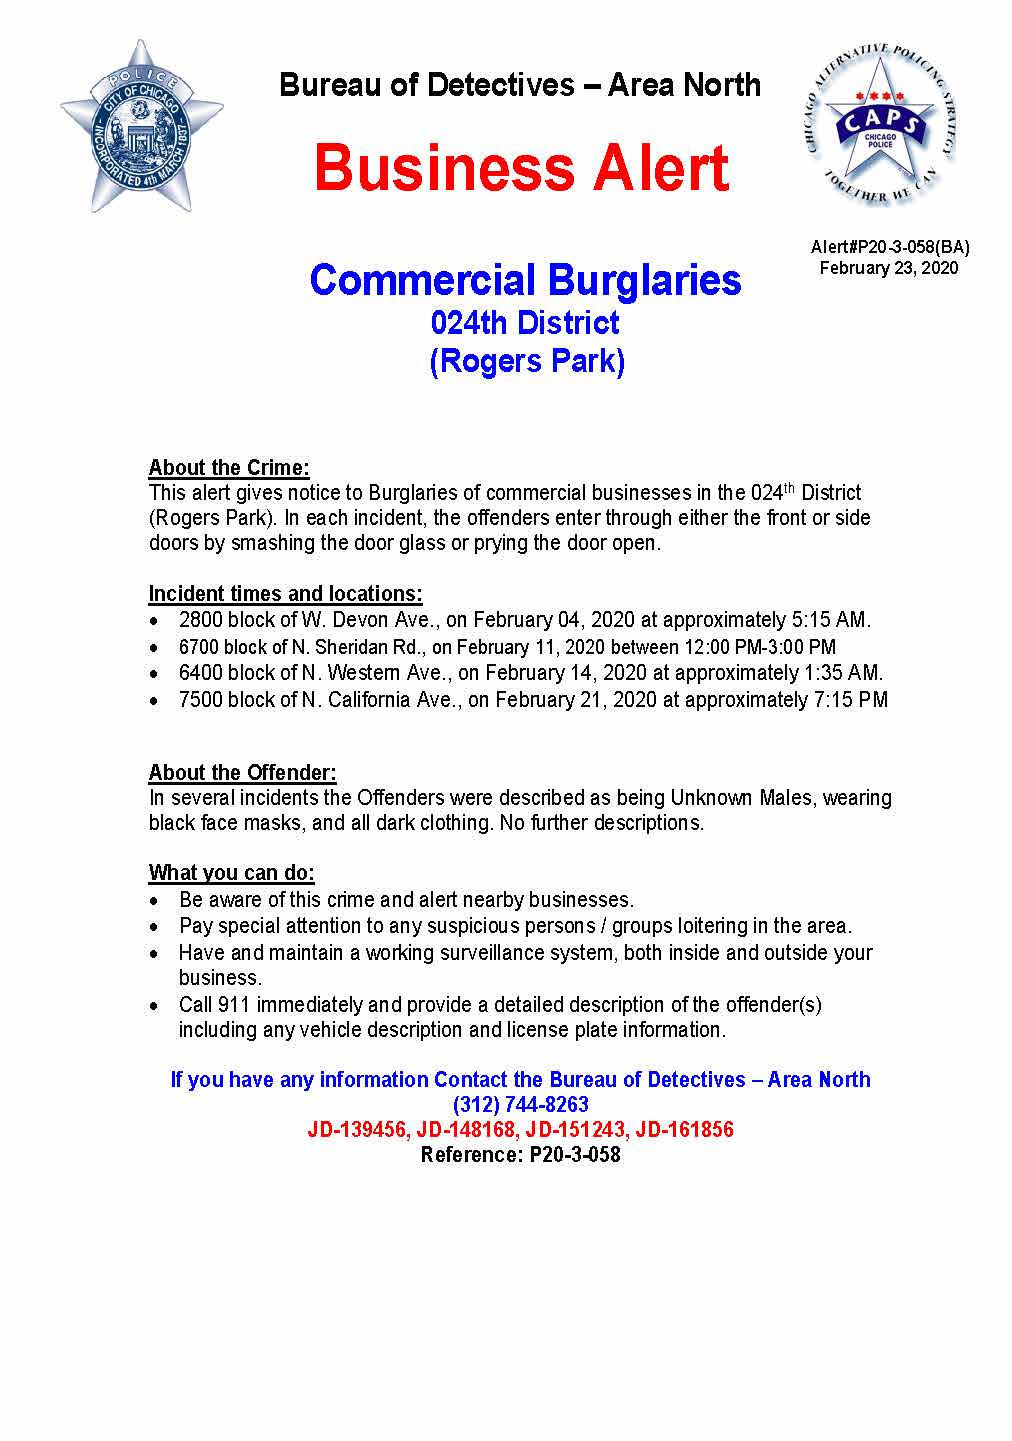 24th District Commercial Burglaries 2/24/20